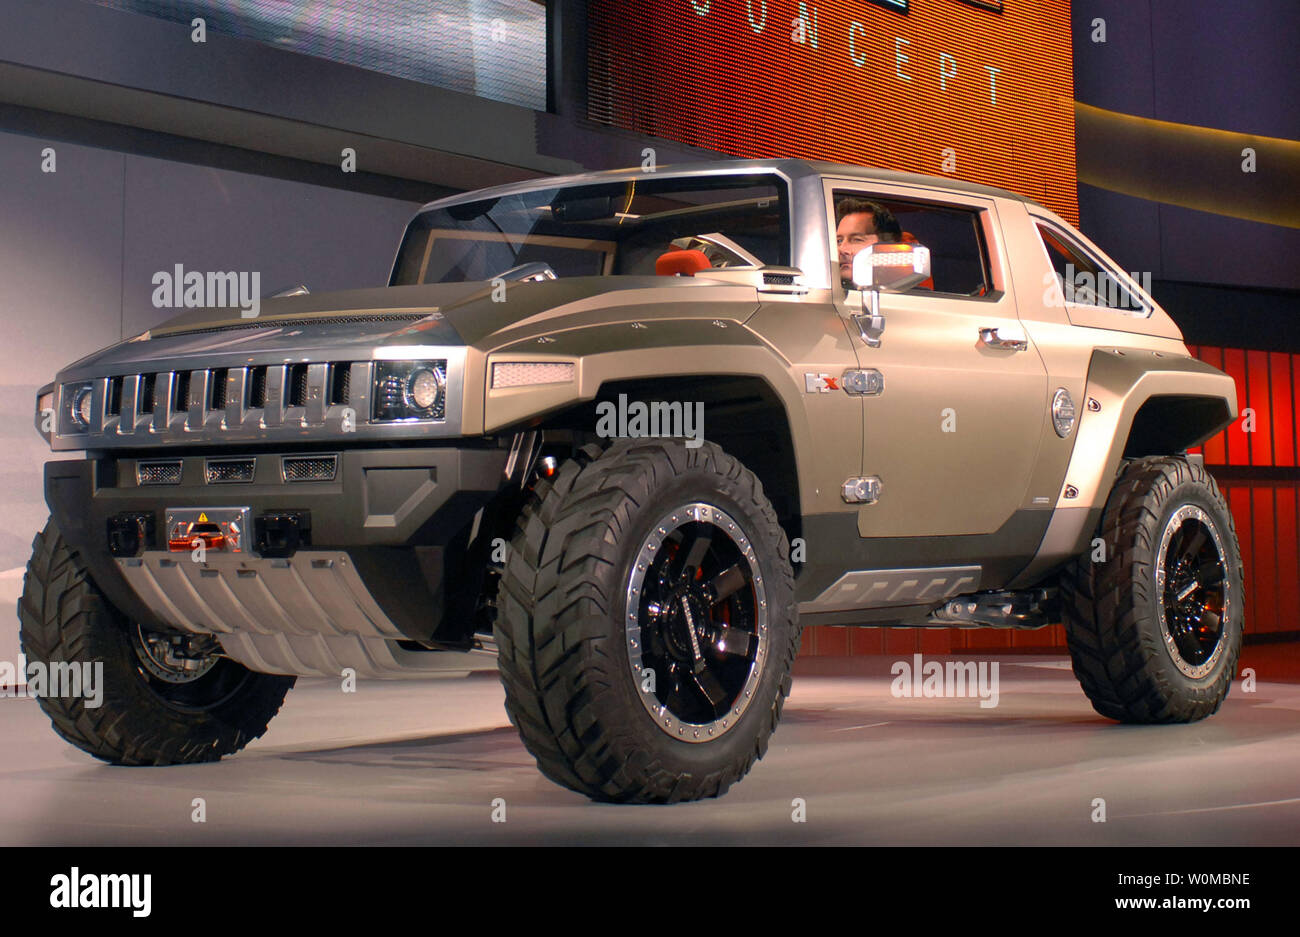 The HUMMER HX Concept makes its world introduction at the 2008 North American International Auto Sunday, January 13, 2008 in Detroit, Michigan. The HUMMER HX Concept is an open-air, two-door off-road vehicle that runs on E85 ethanol fuel. (UPI Photo/Steve Fecht/General Motors) Stock Photo